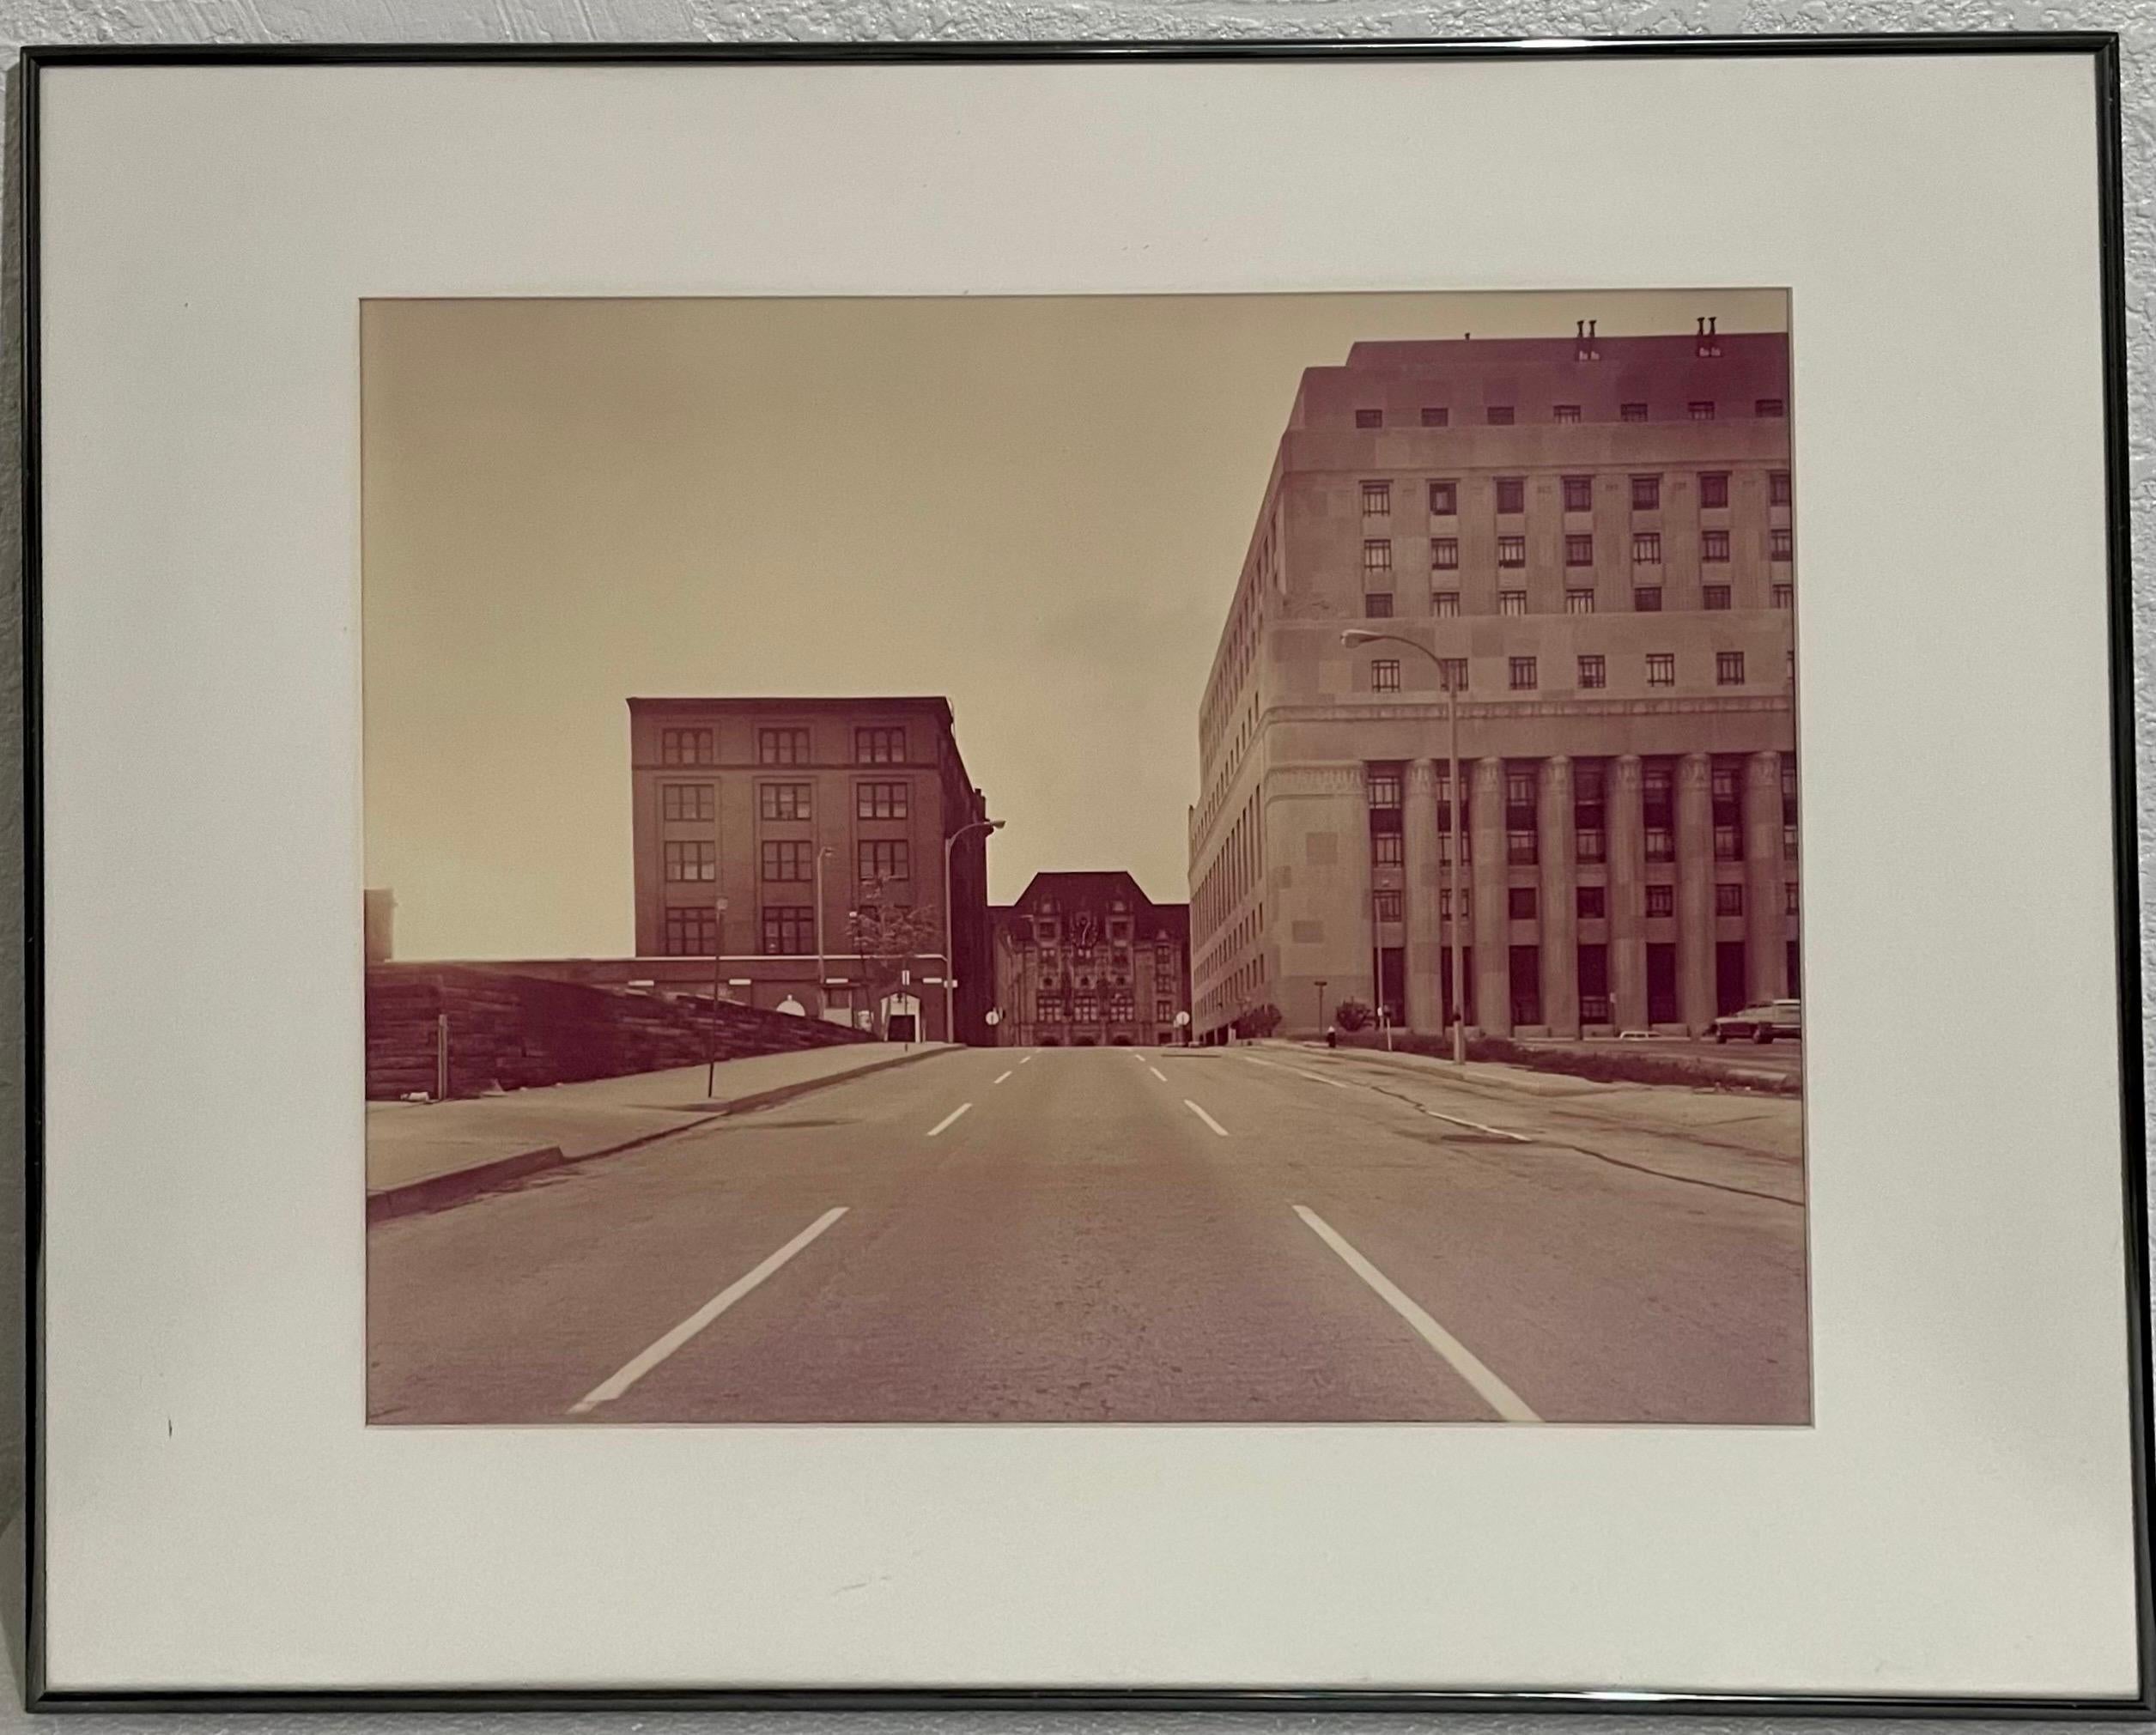 St. Louis and the Arch Vintage Photograph Joel Meyerowitz Architectural Photo For Sale 1